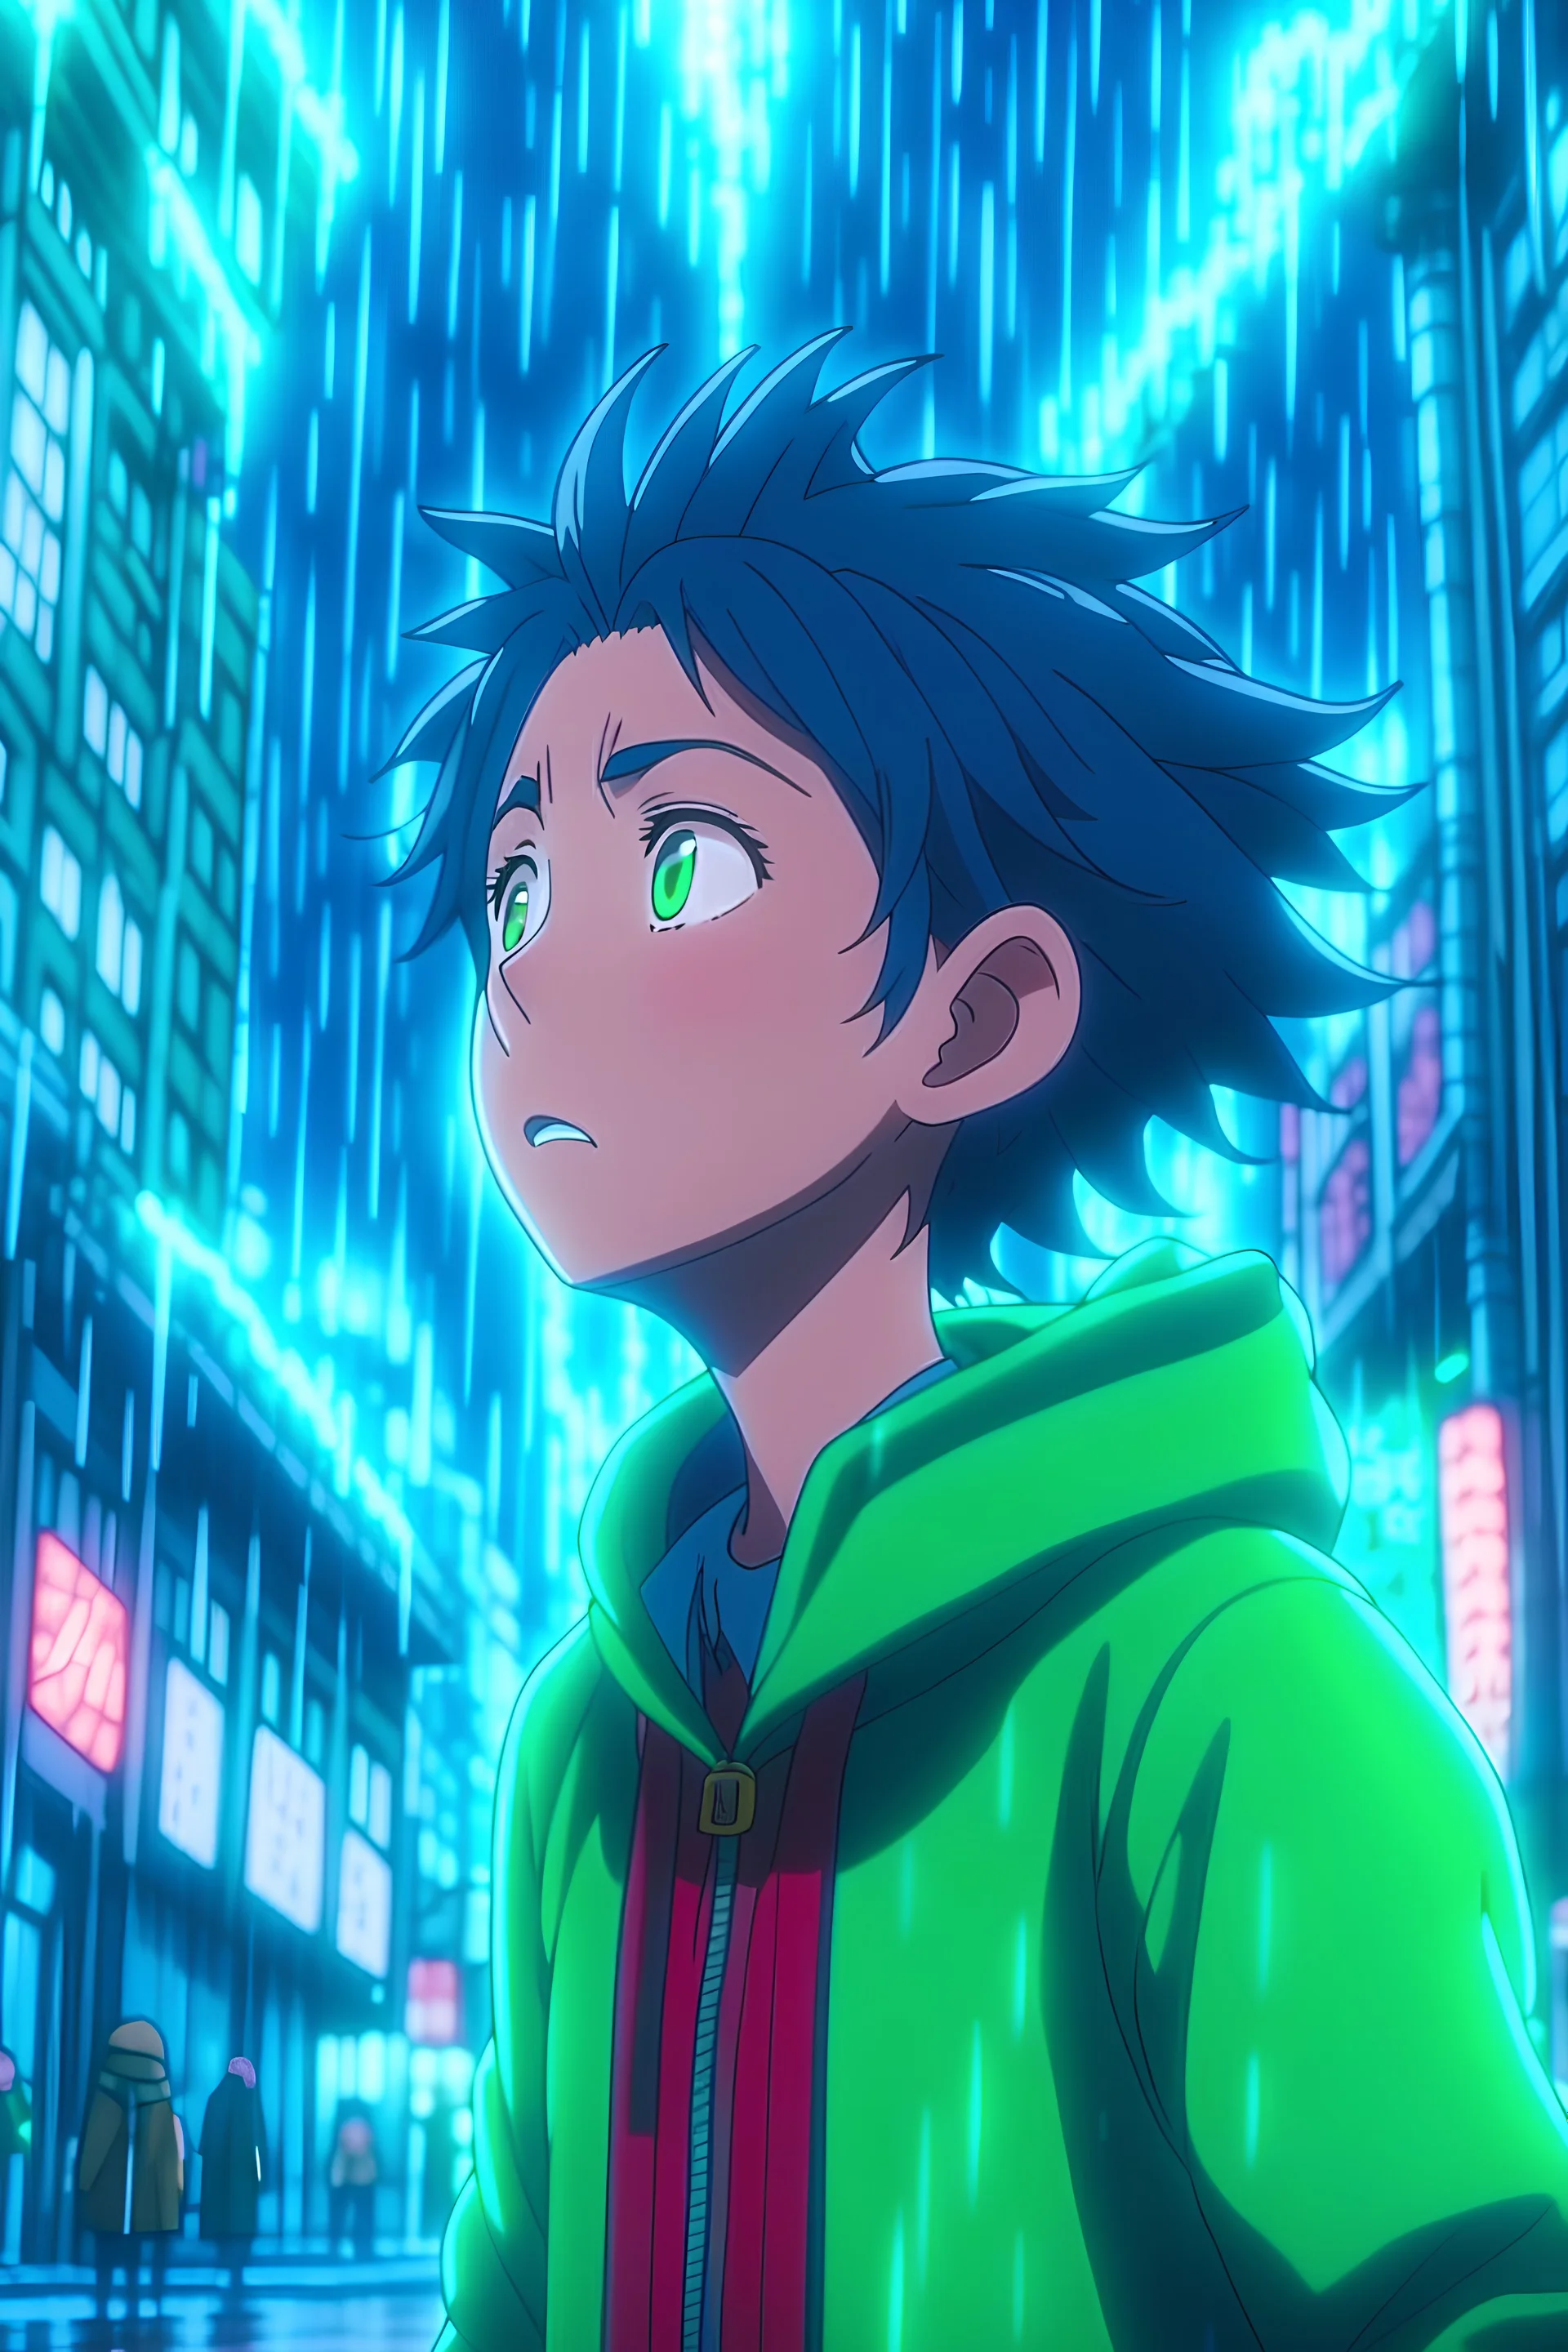 Tanjiro in the rain in the city looking up